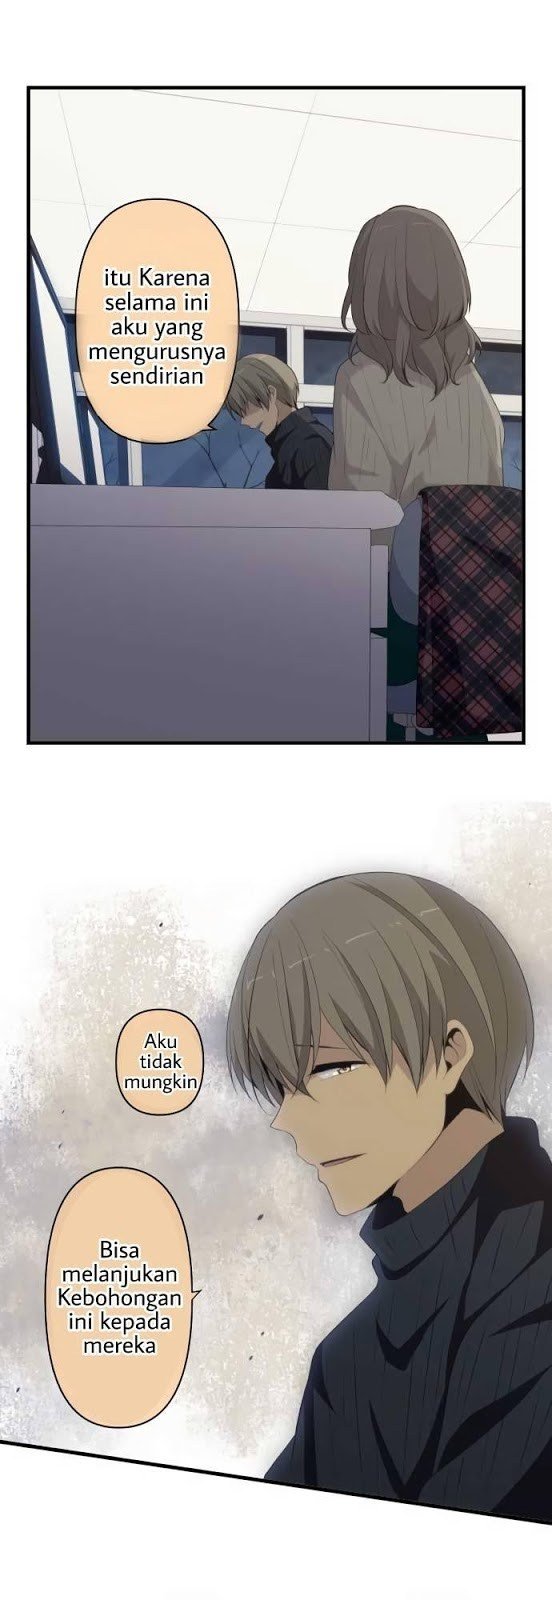 ReLife Chapter 210